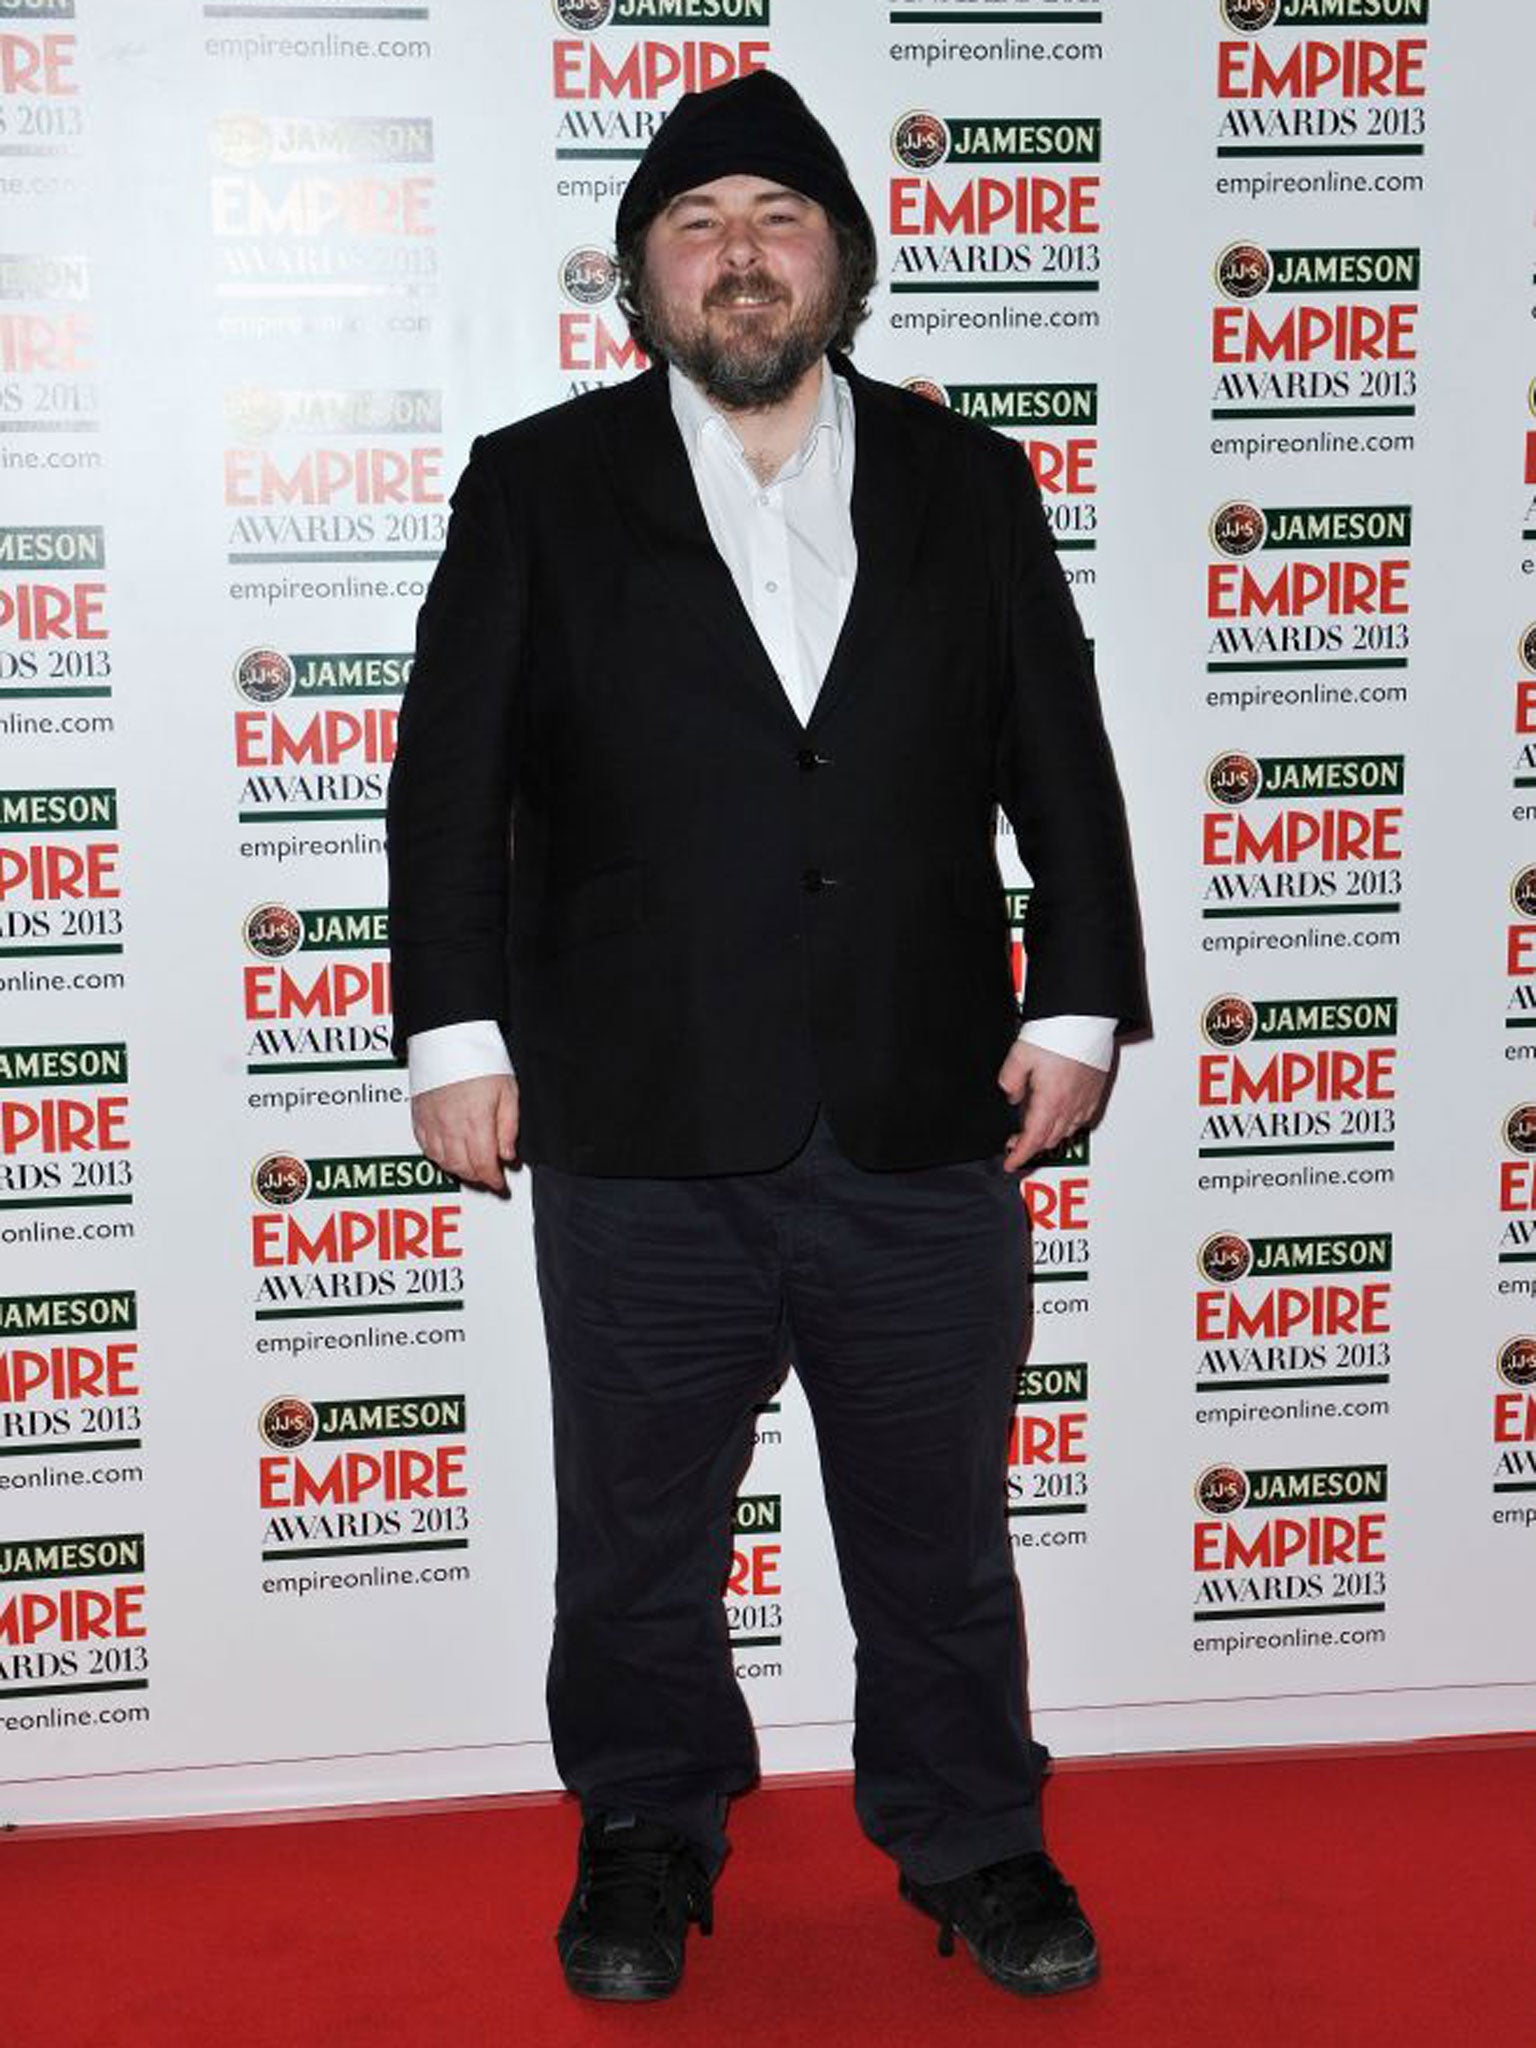 Page 3 Profile: Ben Wheatley, Director | The Independent | The Independent